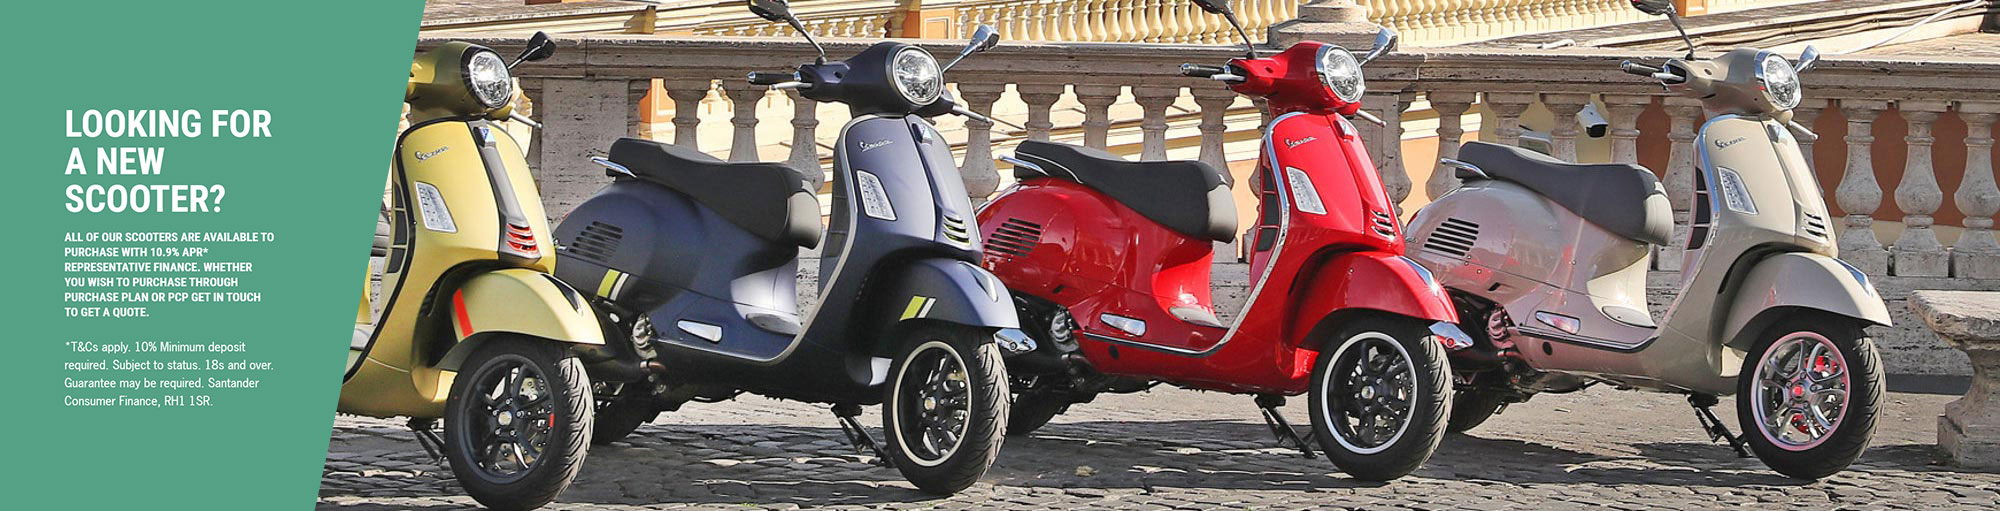 Vespa - looking for a new Scooter?